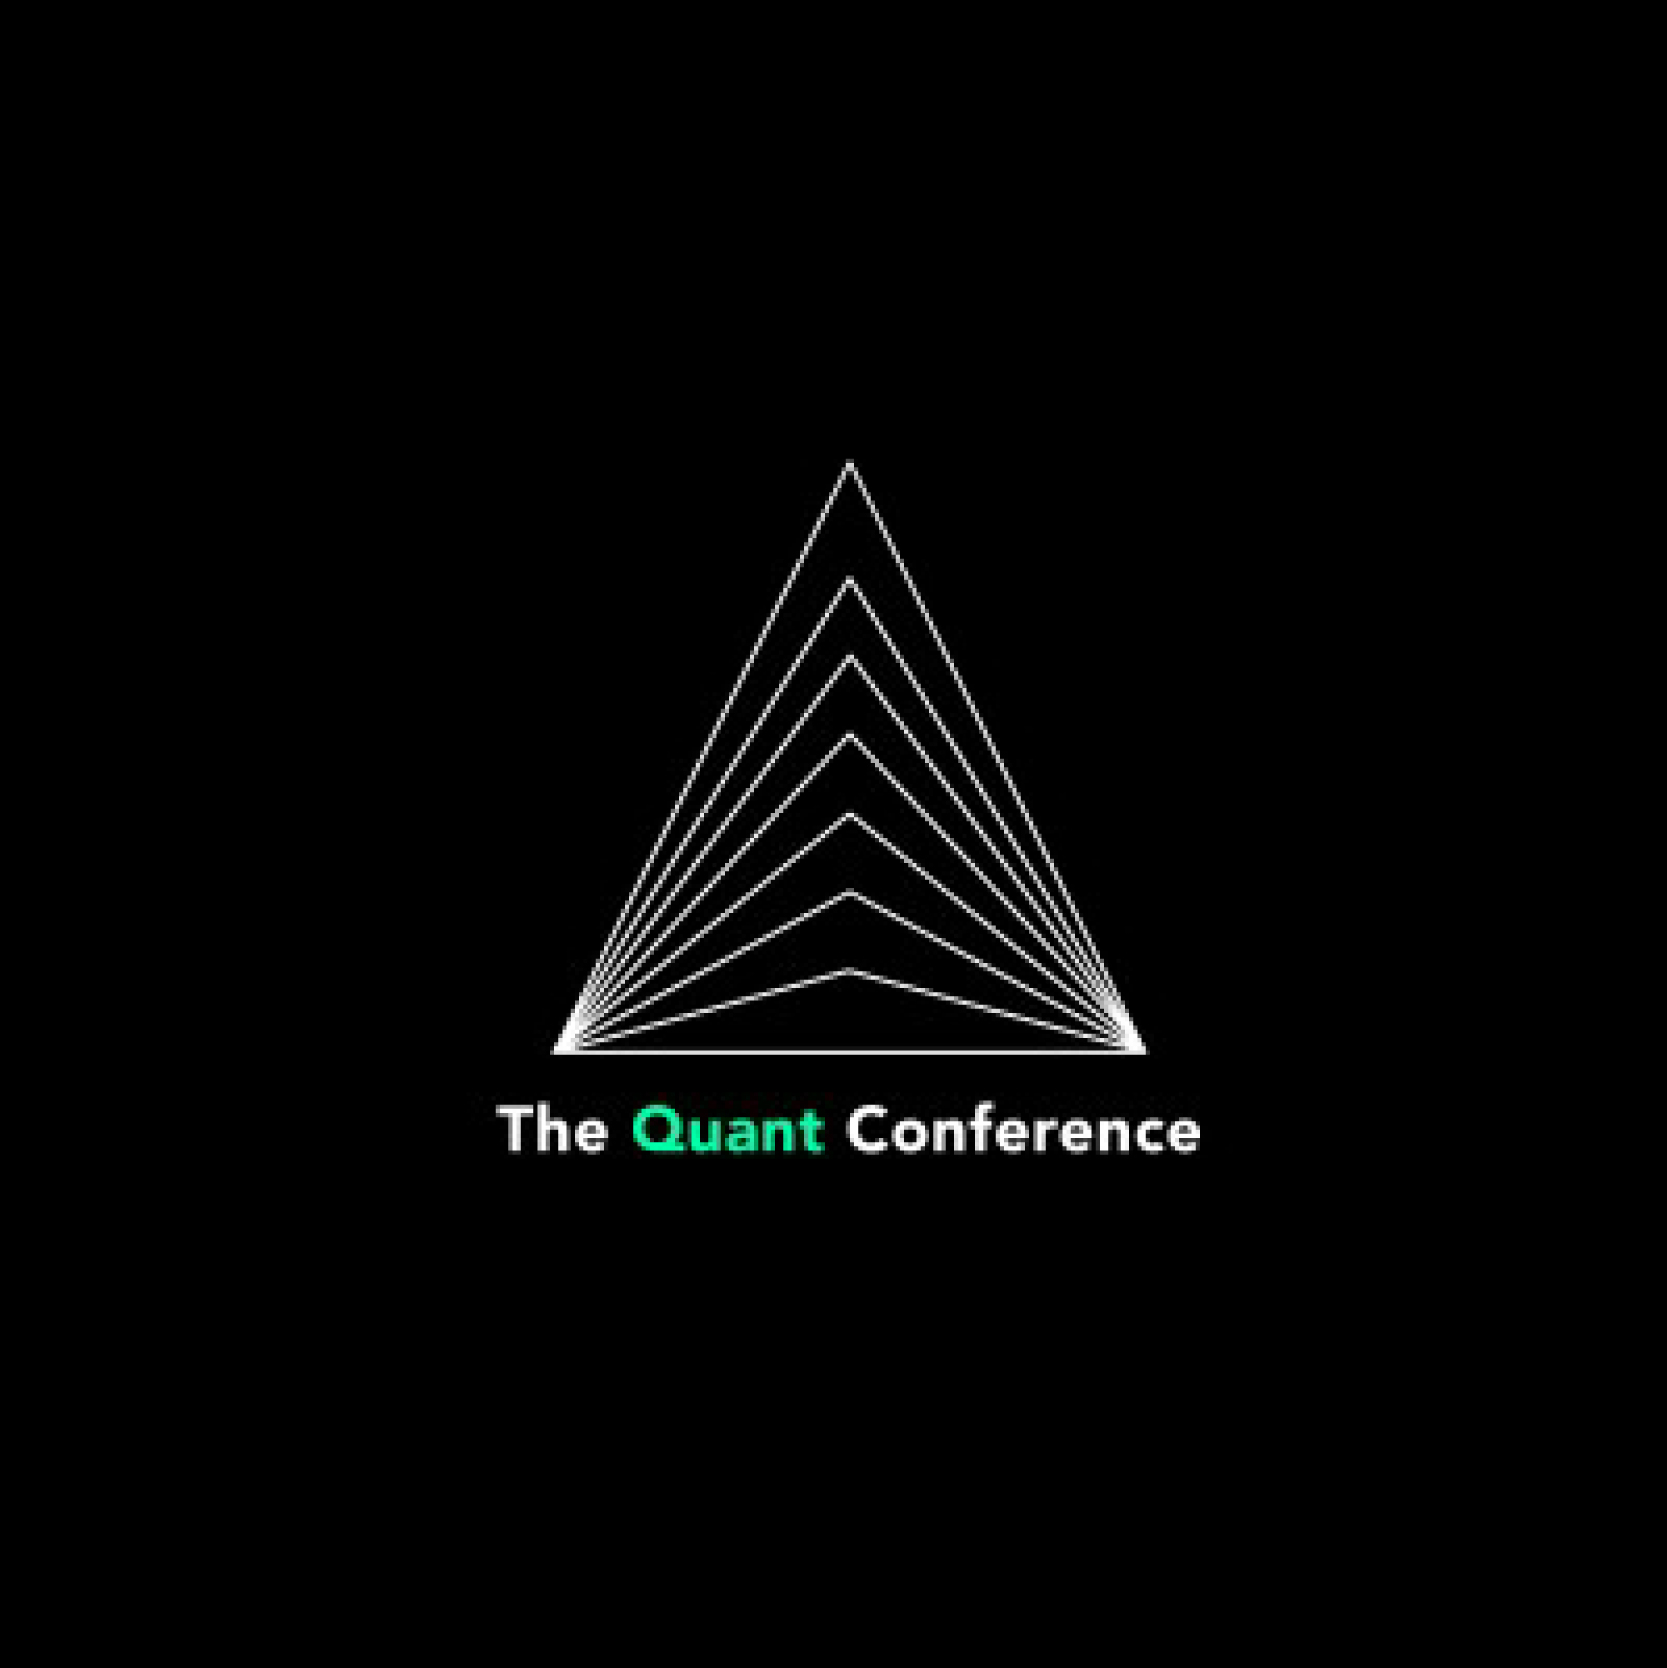 The Quant Conference